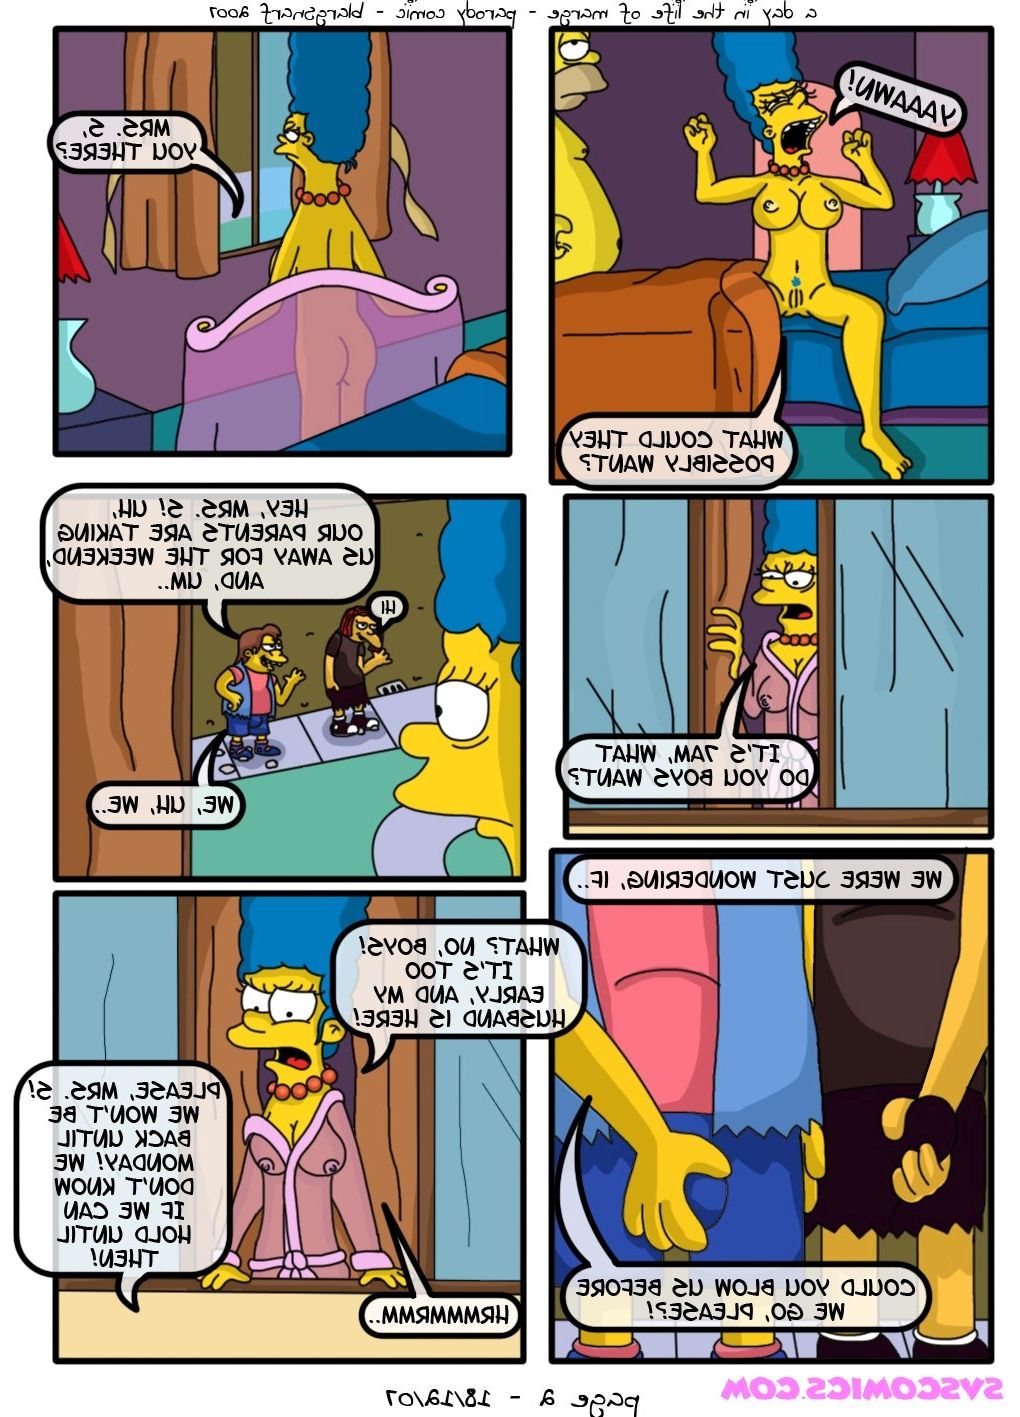 day-life-marge-simpsons image_9557.jpg